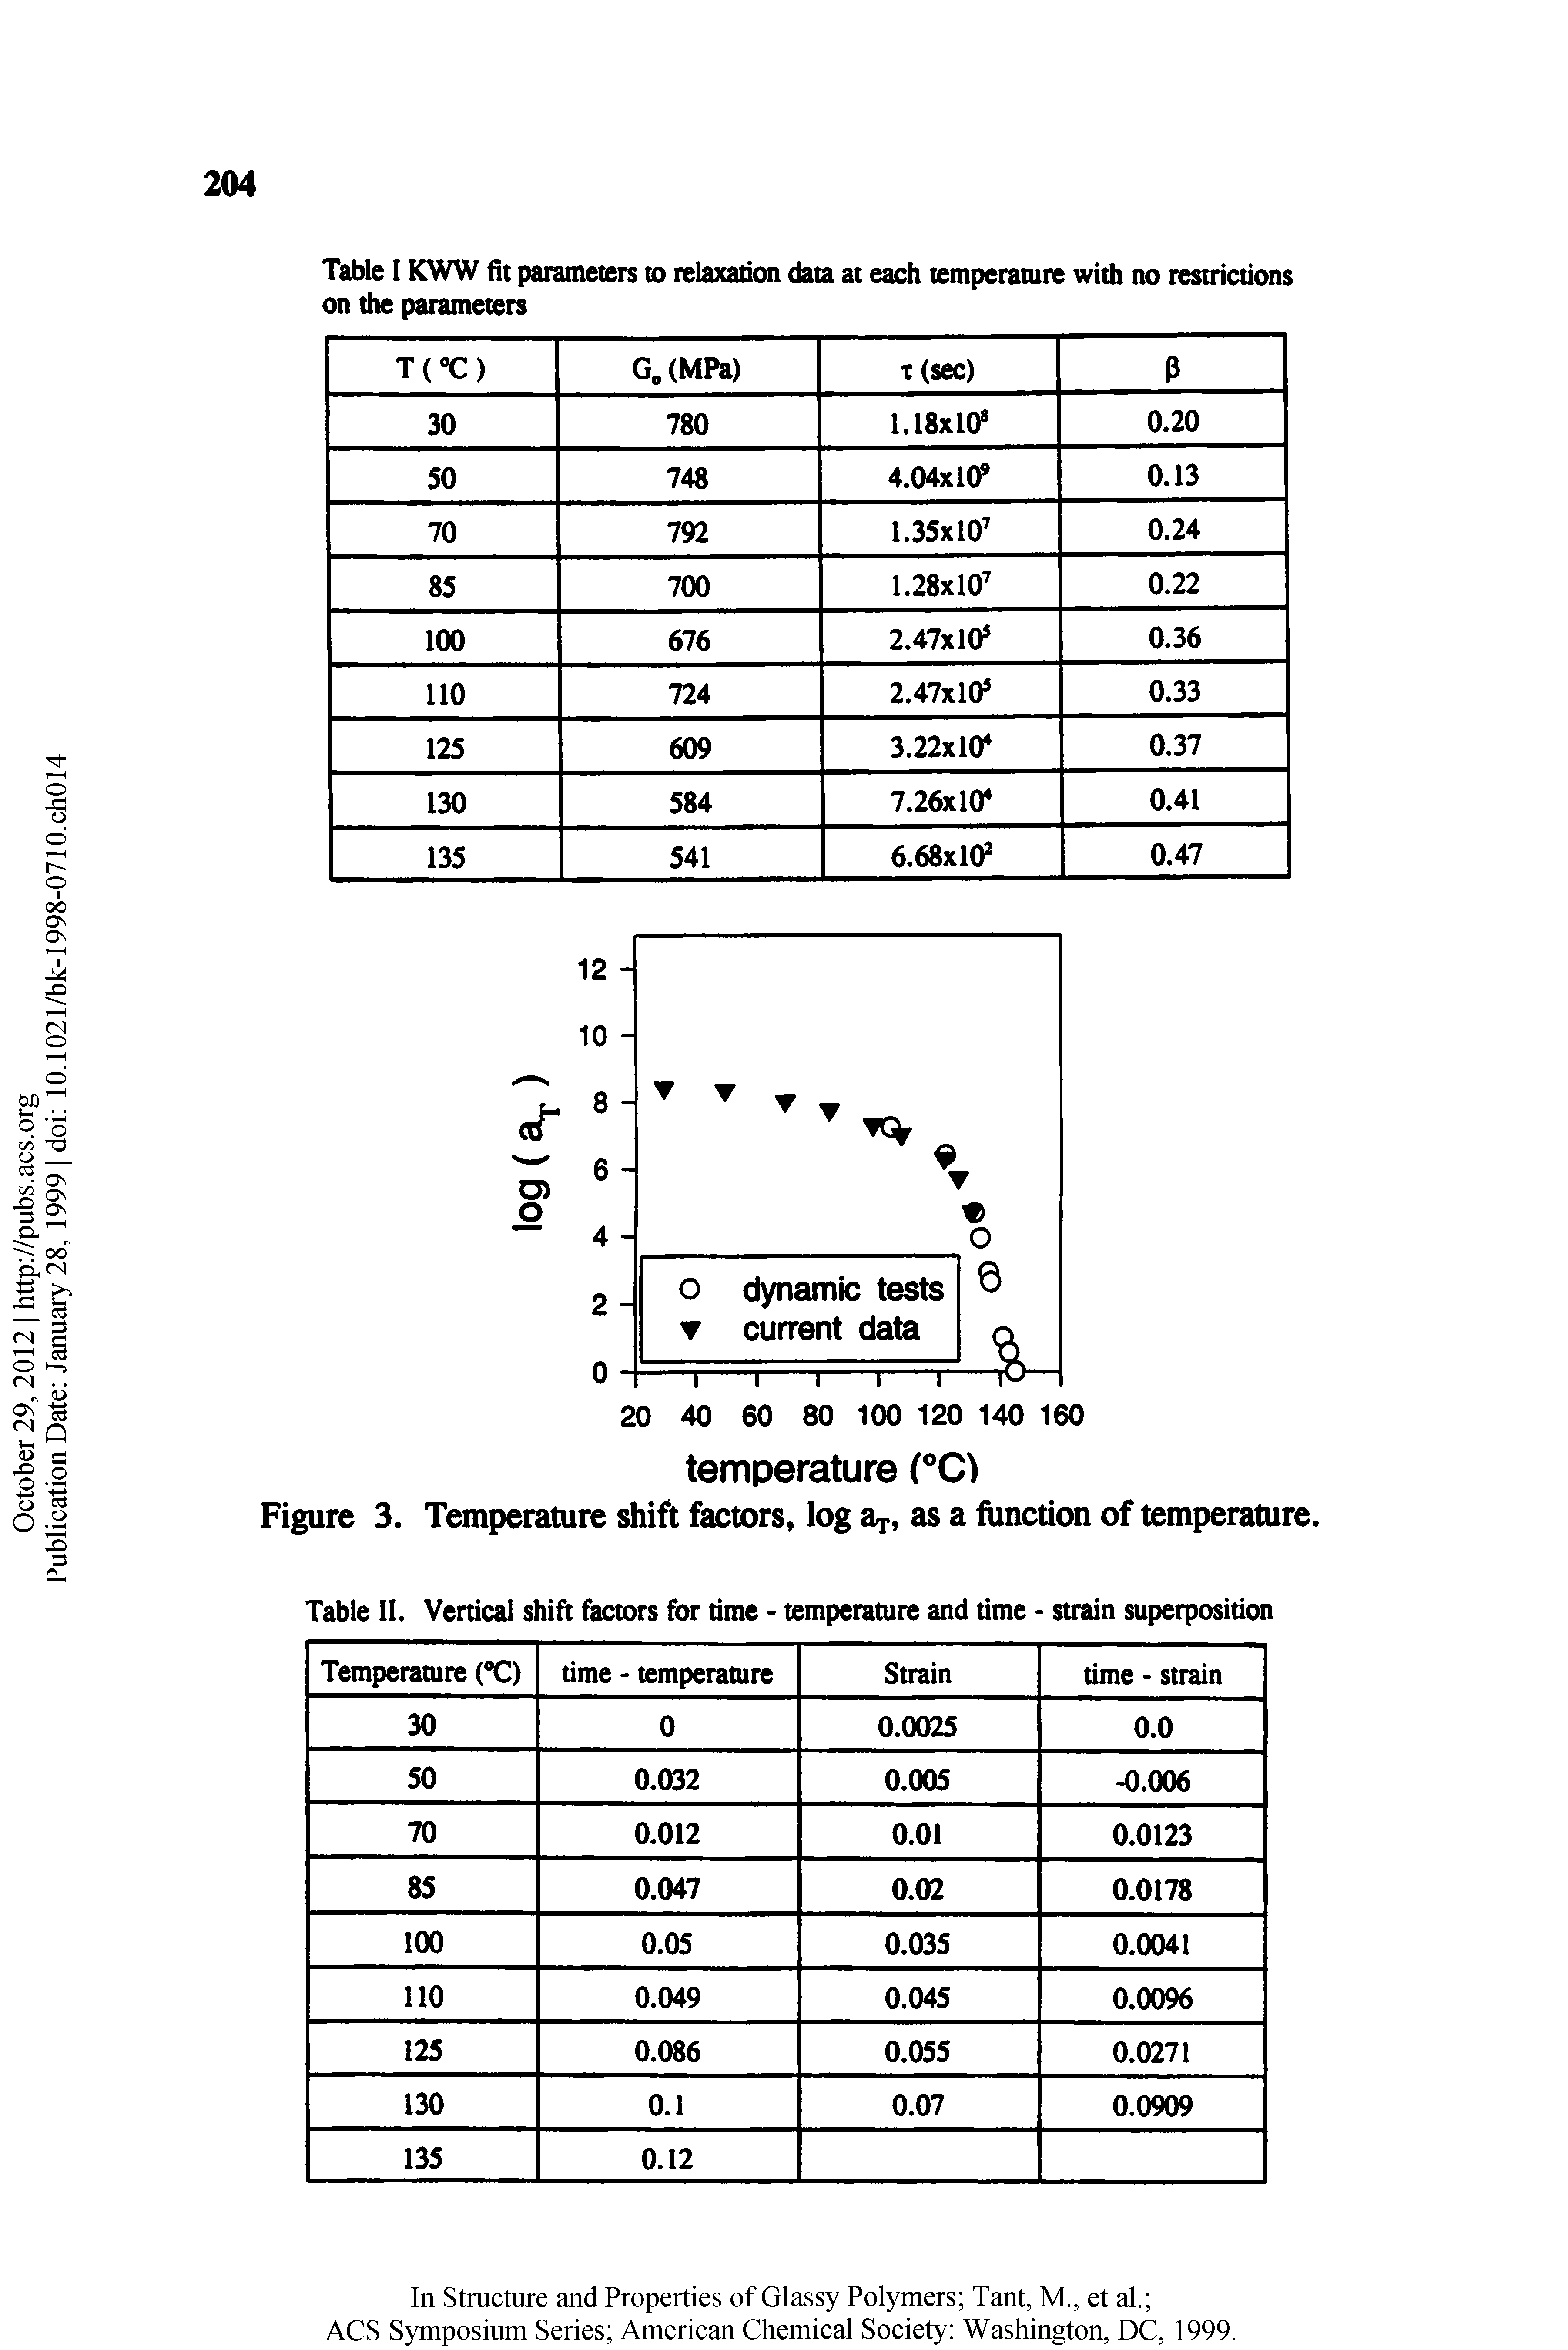 Figure 3. Tonperature shift ftu tors, log as a function of temperature. Table II. Vertical shift factors for time - temperature and time - strain superposition...